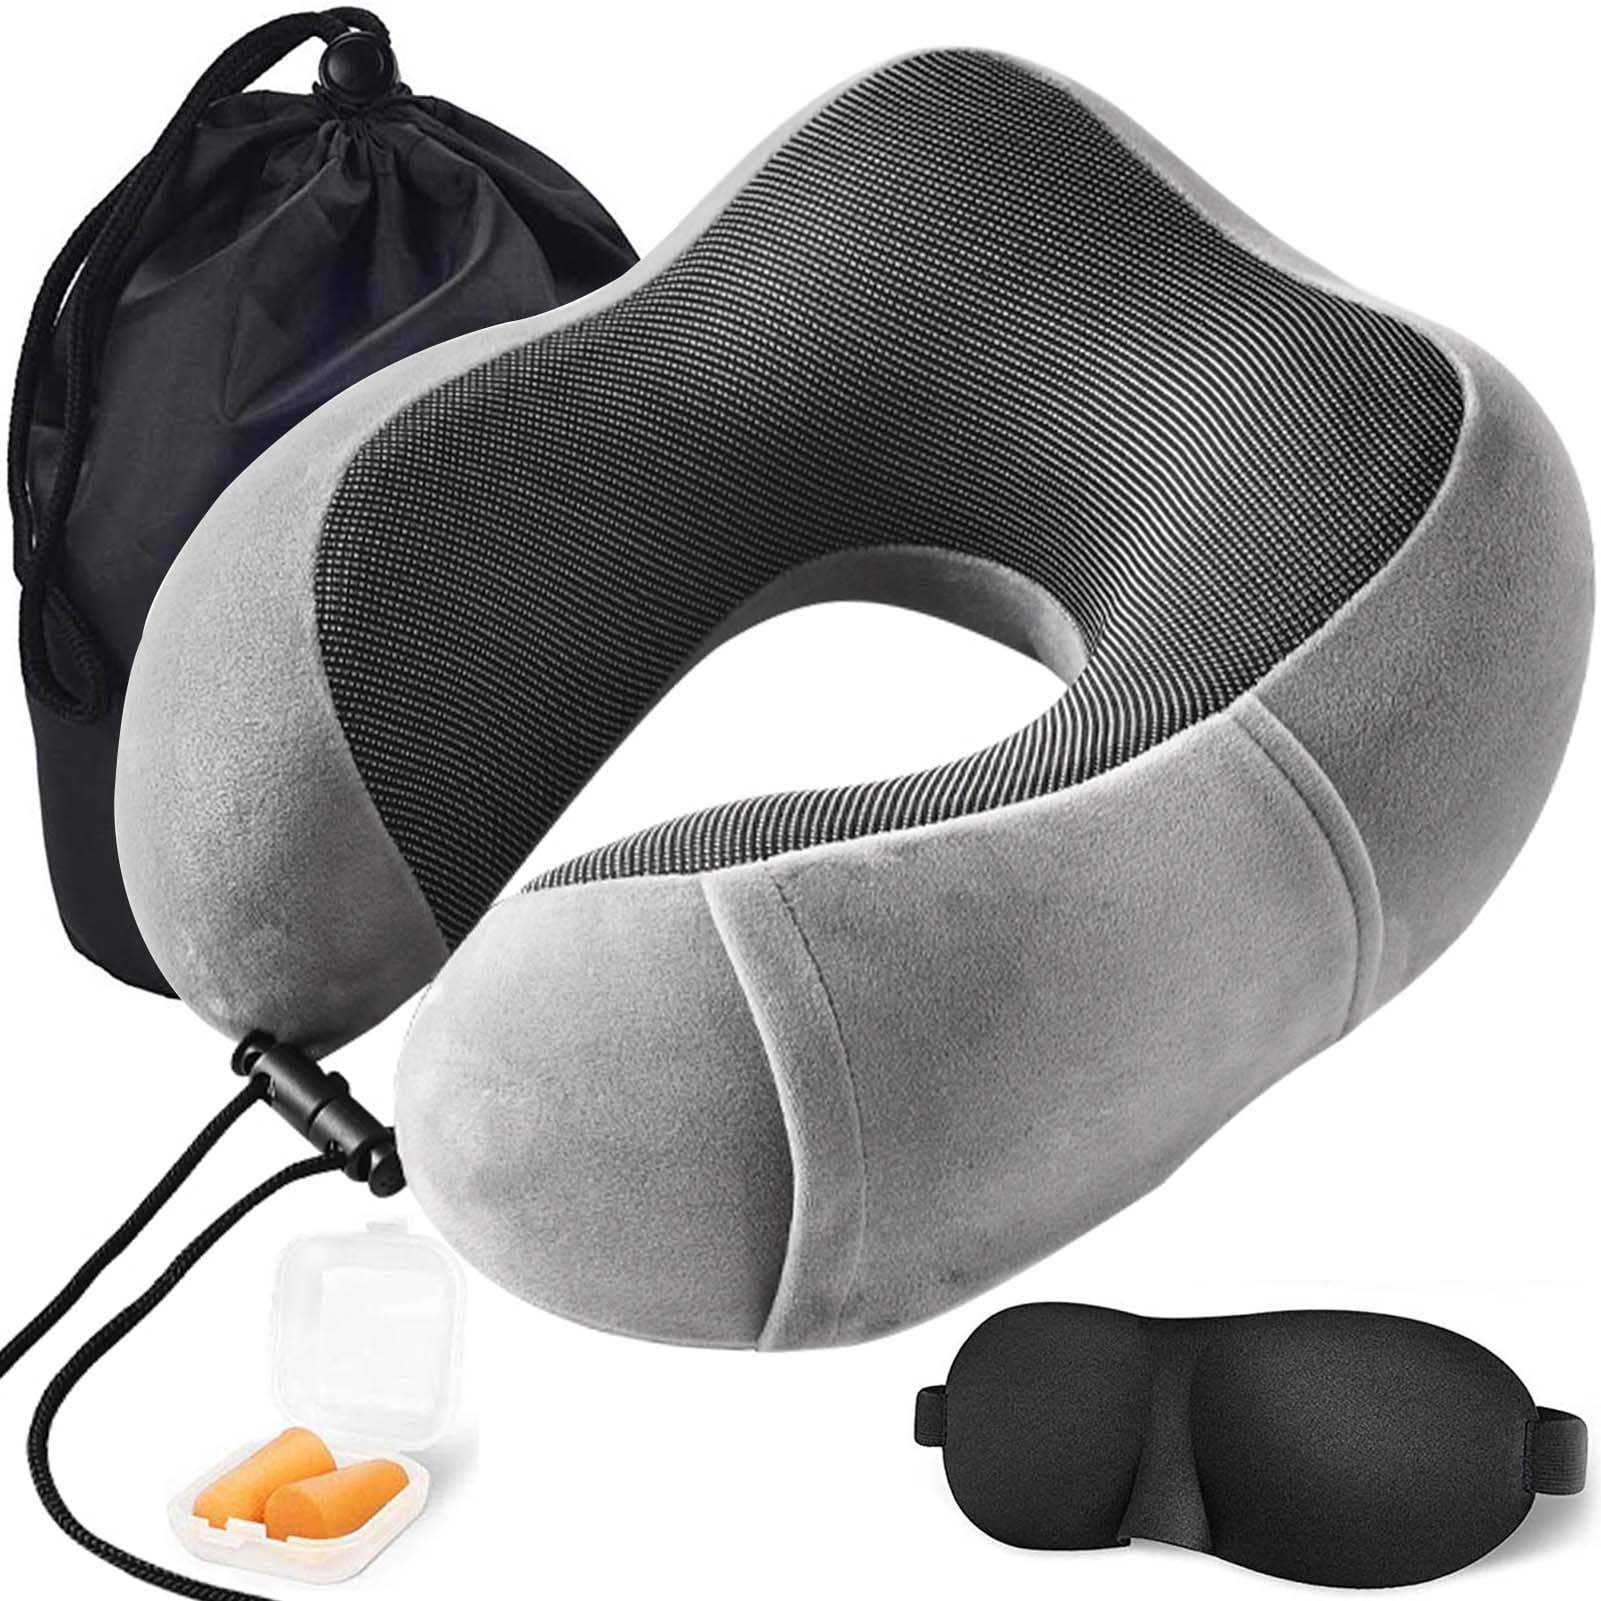 Travel Pillow Neck Pillow for Travelling Or Flight Pillow Designed for Smooth Comfort from Memory Foam Pillow Concept Suitable for Adults & Kids 